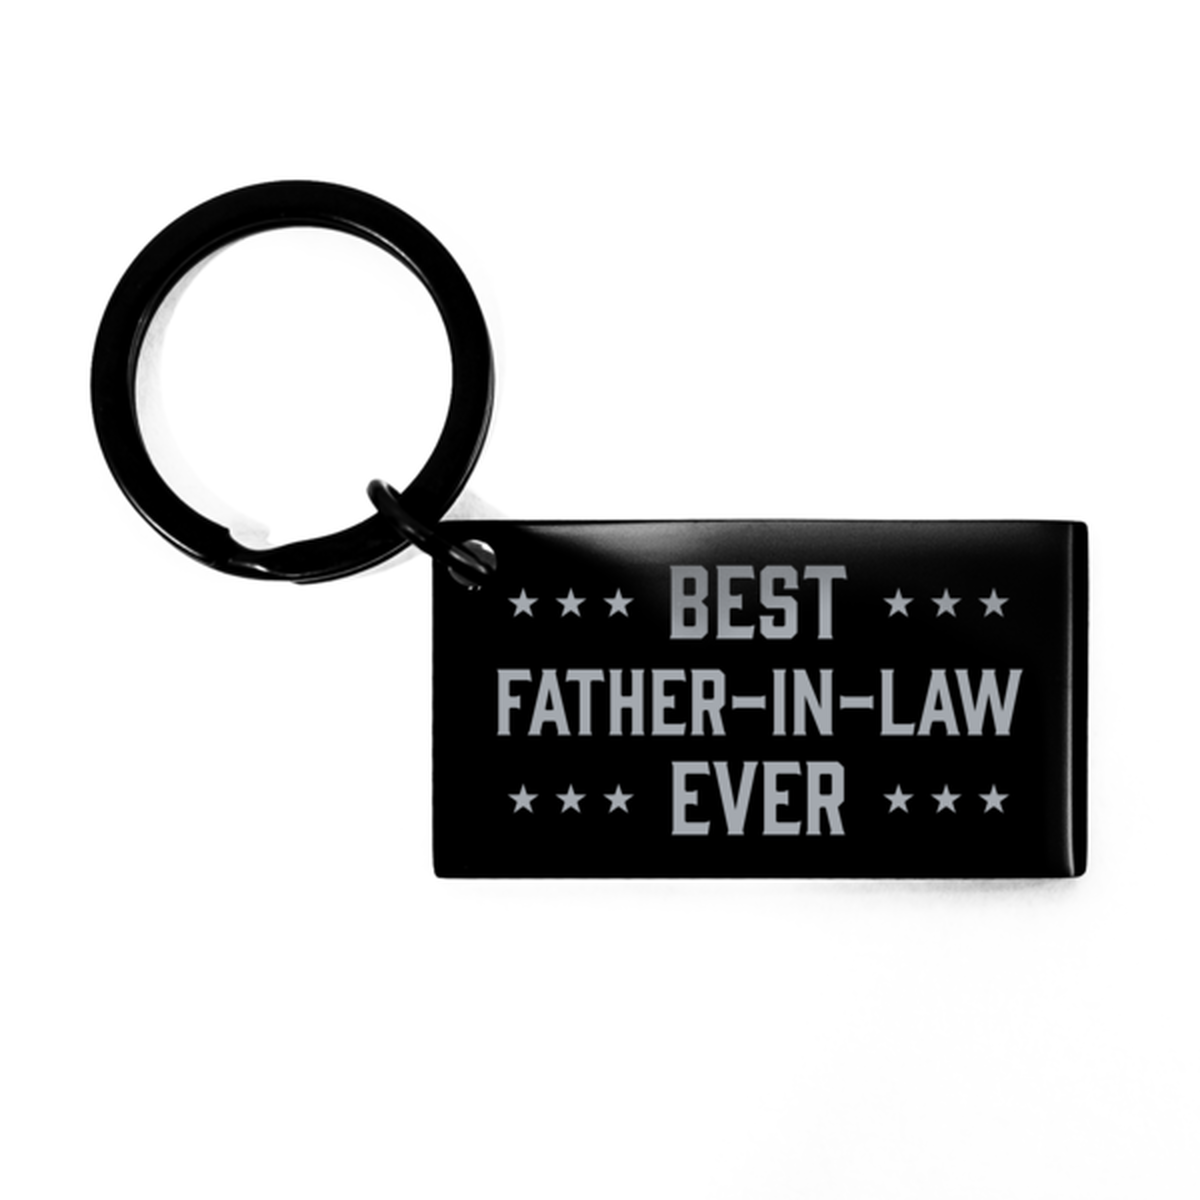 Best Father-in-law Ever Father-in-law Gifts, Funny Black Keychain For Father-in-law, Birthday Engraved Keyring Presents For Men